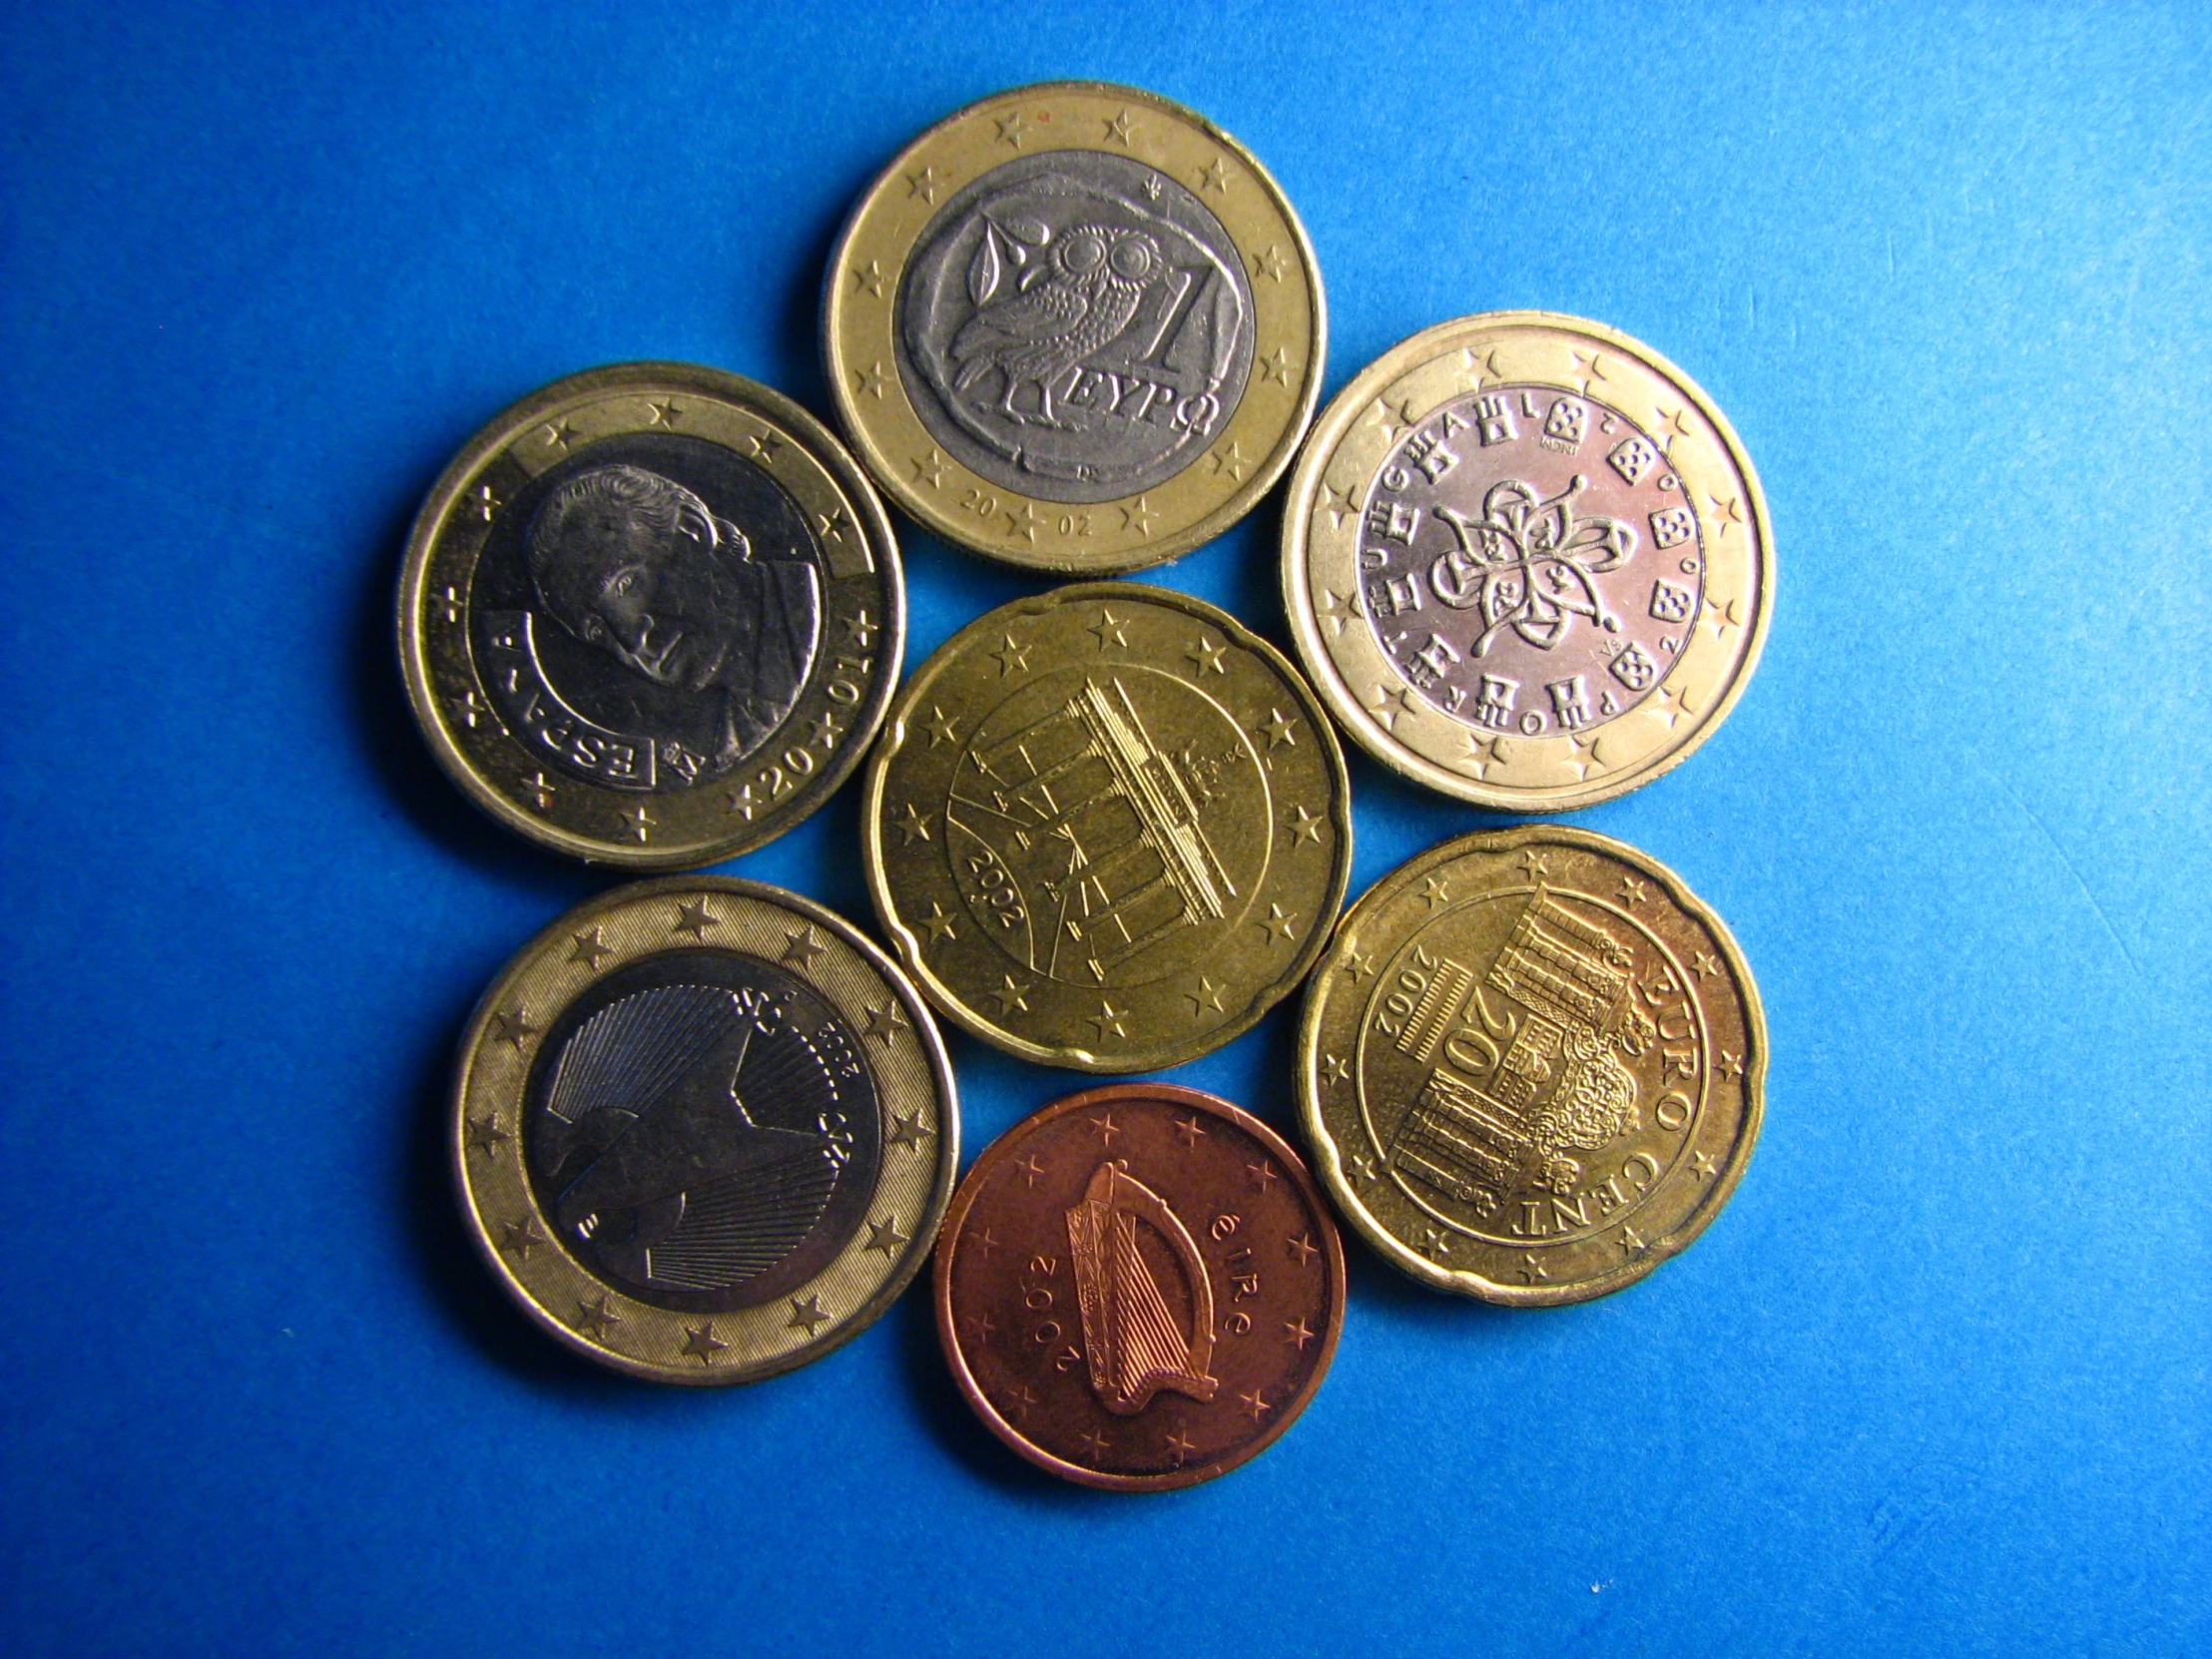 there is a set of five coins in different countries